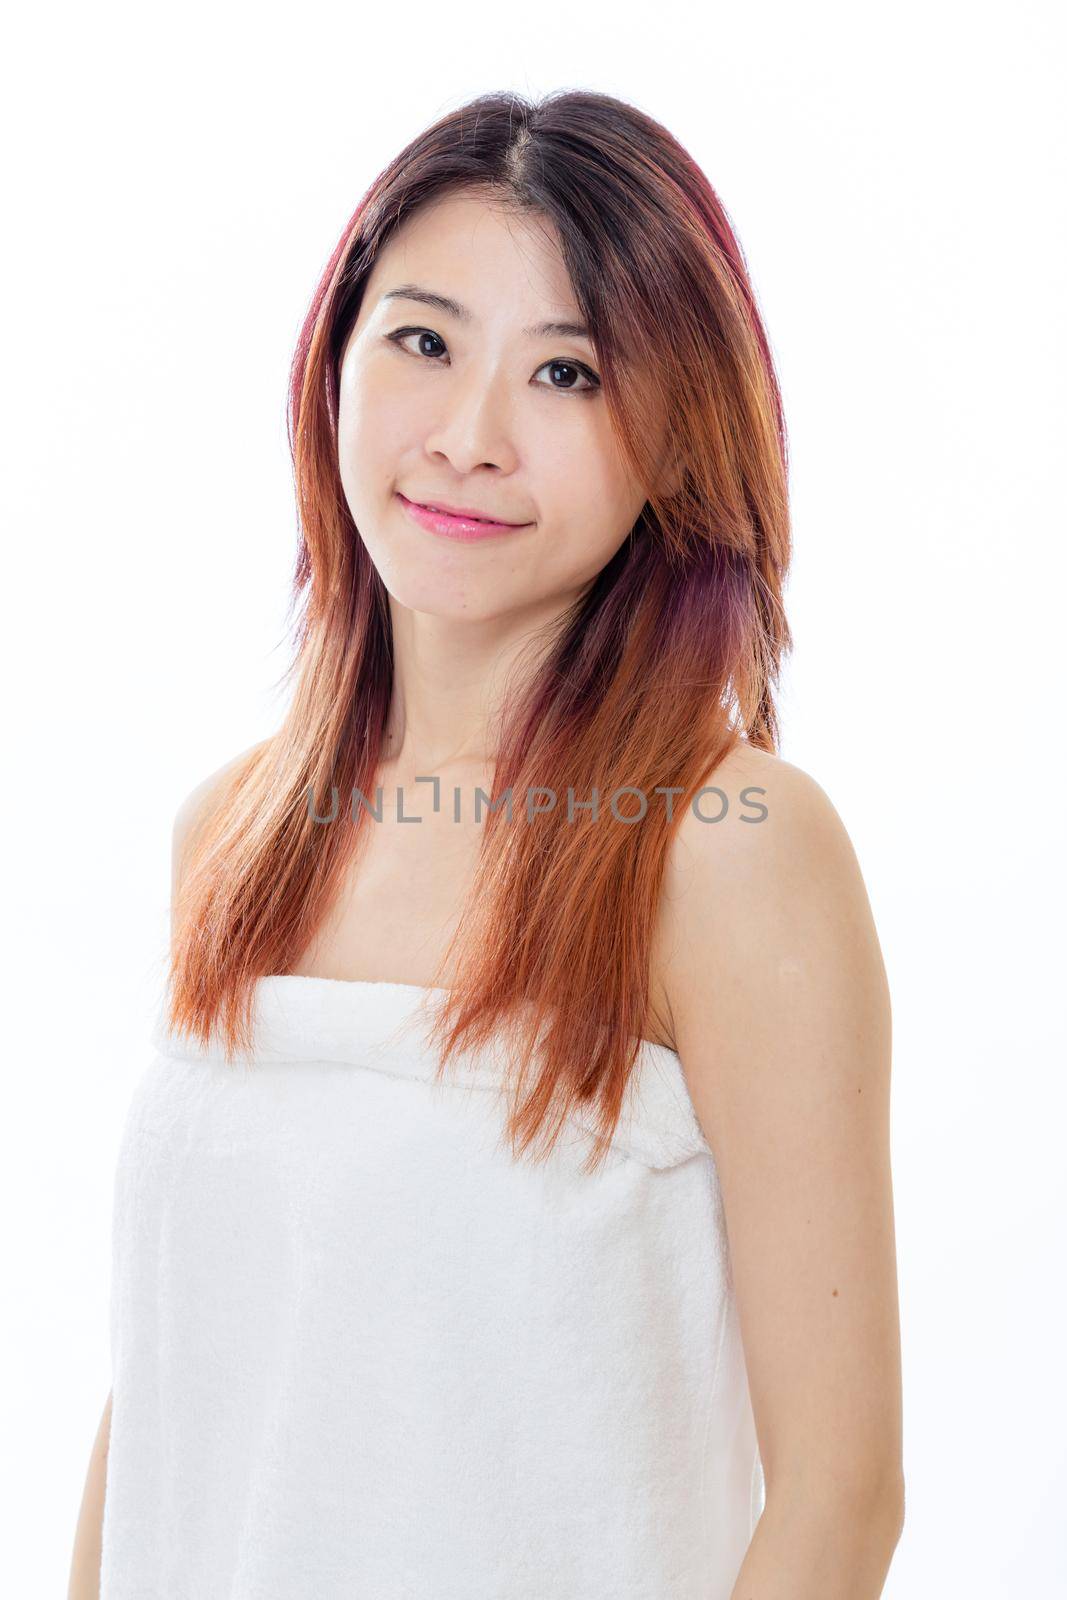 Chinese American woman wearing a white towel, beauty concept by imagesbykenny